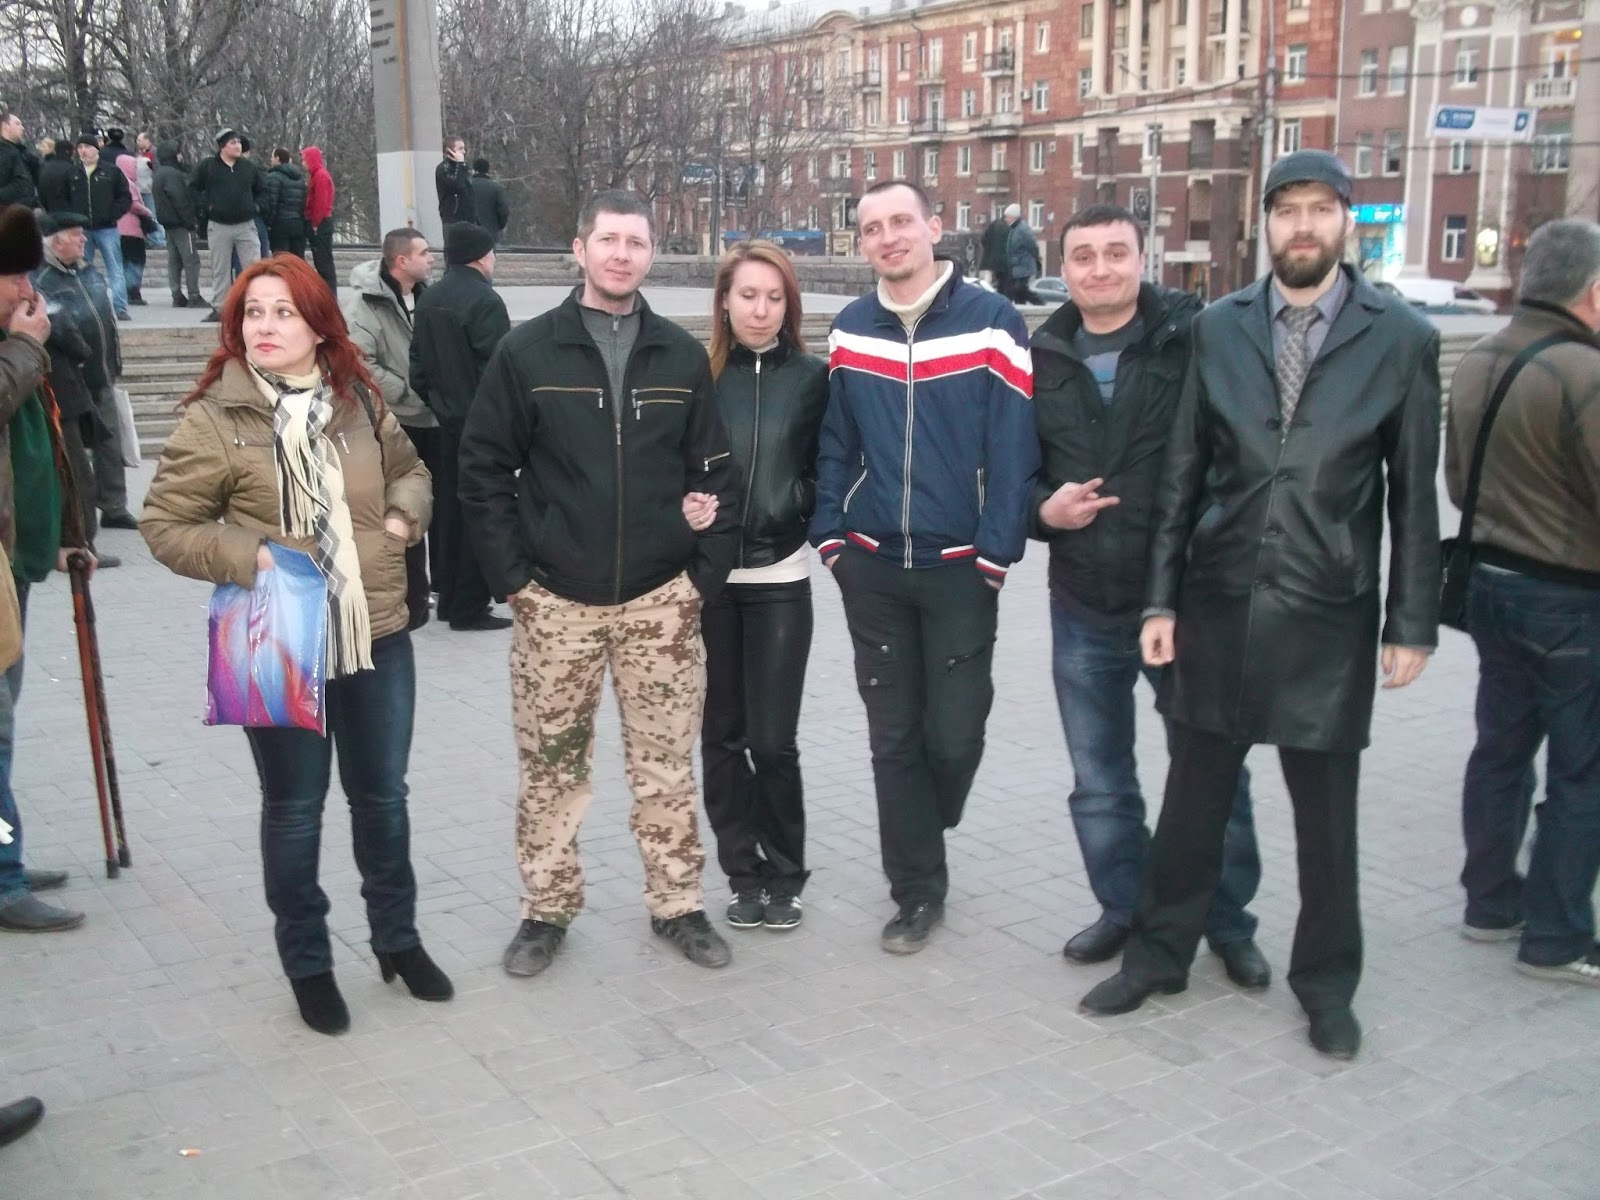 The "delegation" of the Russian Imperial Movement with the activists of the "Donetsk Republic", Donetsk, Ukraine, 14 March 2014. Nikolay Trushchalov is on the far right